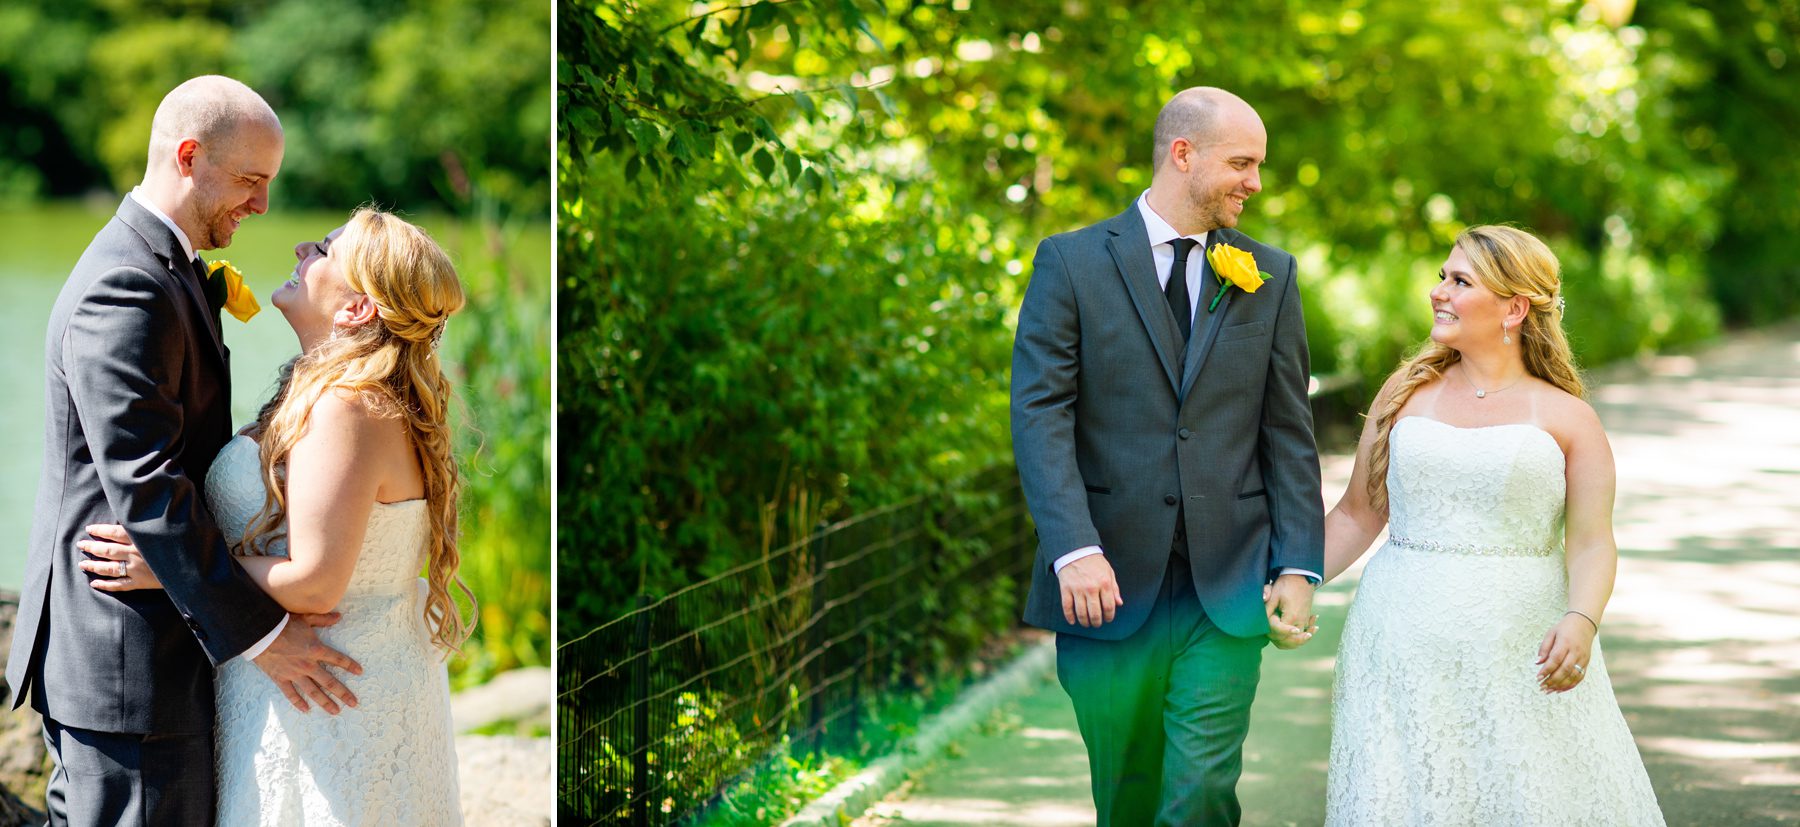 Elopement in Central Park During Covid